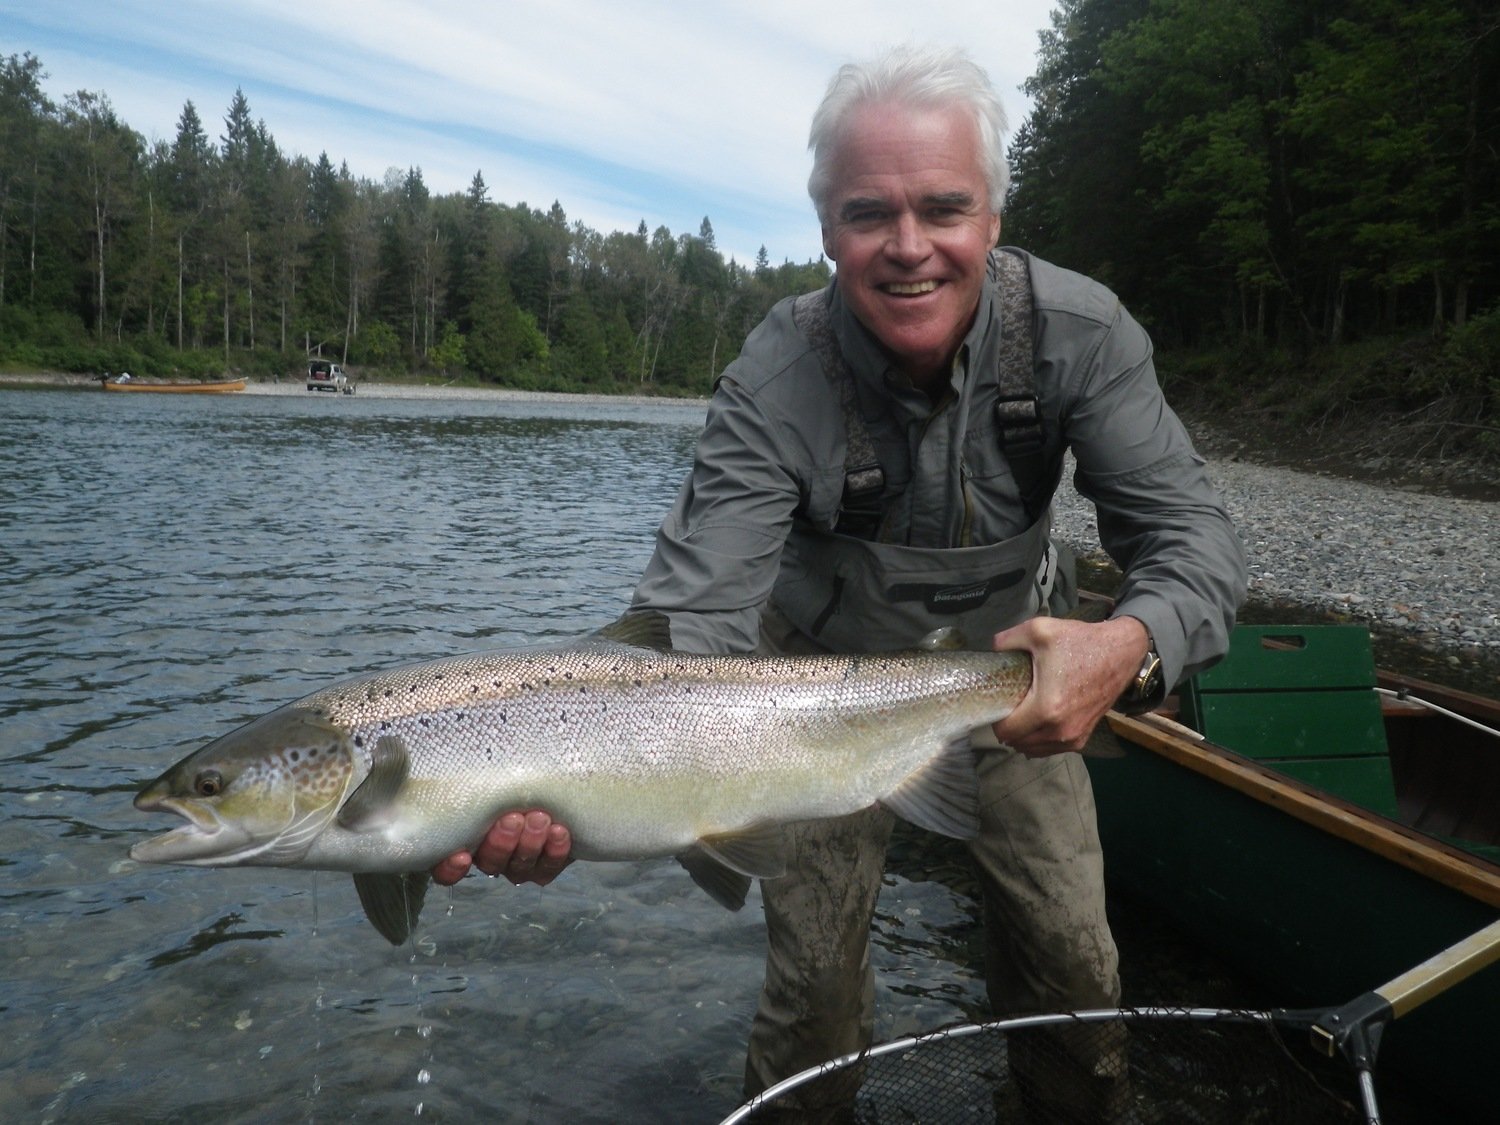 What a cracking Atlantic Salmon no wonder he looks happy holding his prize, congratulations 